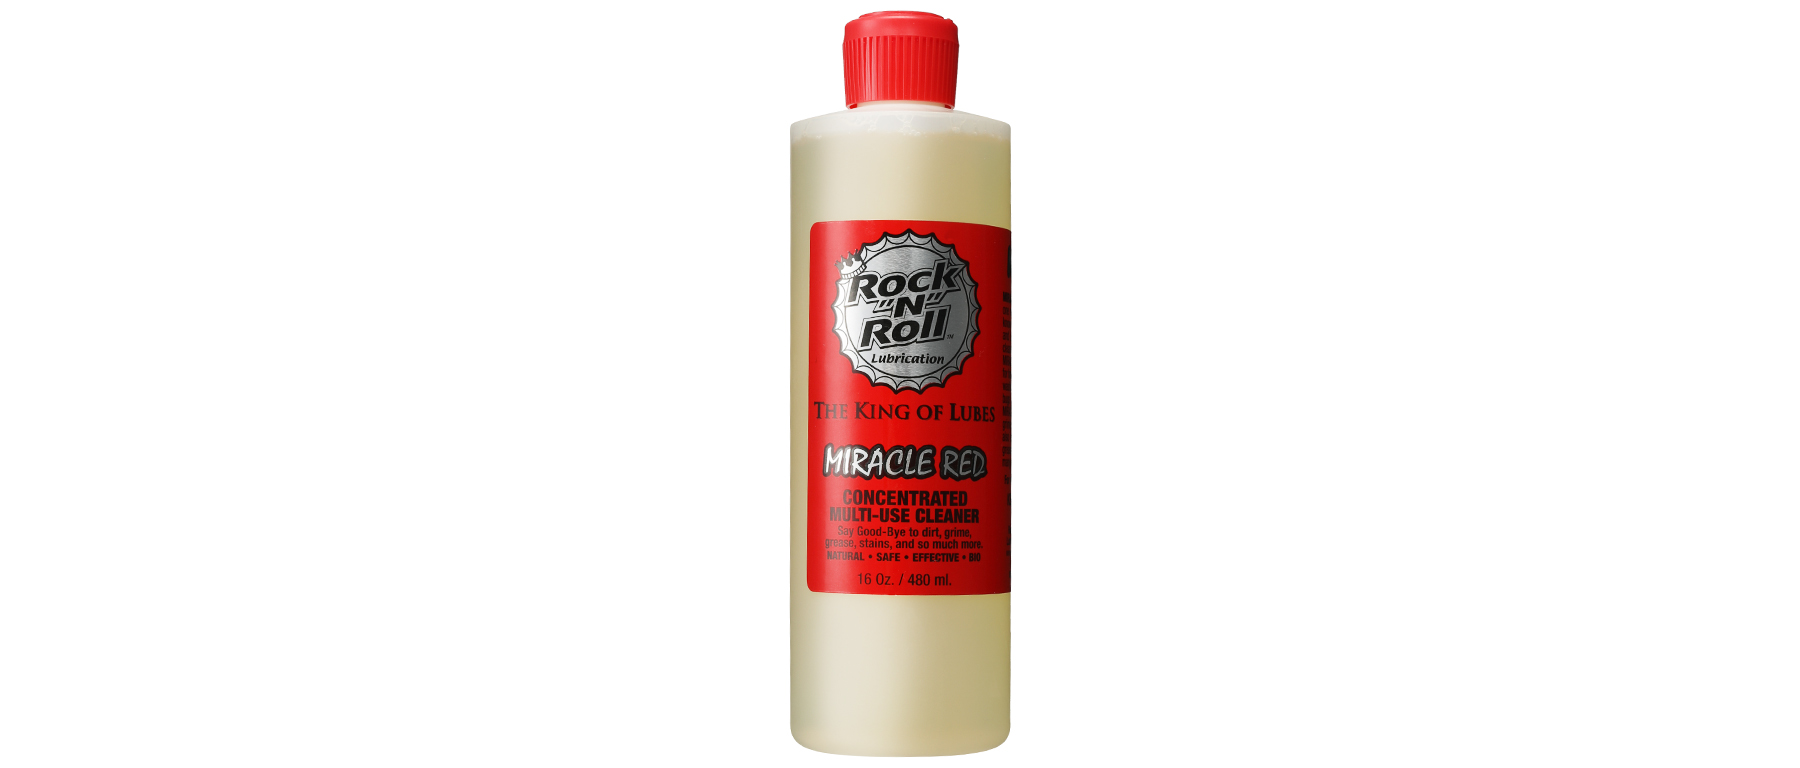 Rock N Roll Miracle Red 3-n-1 Degreaser Concentrate 16oz